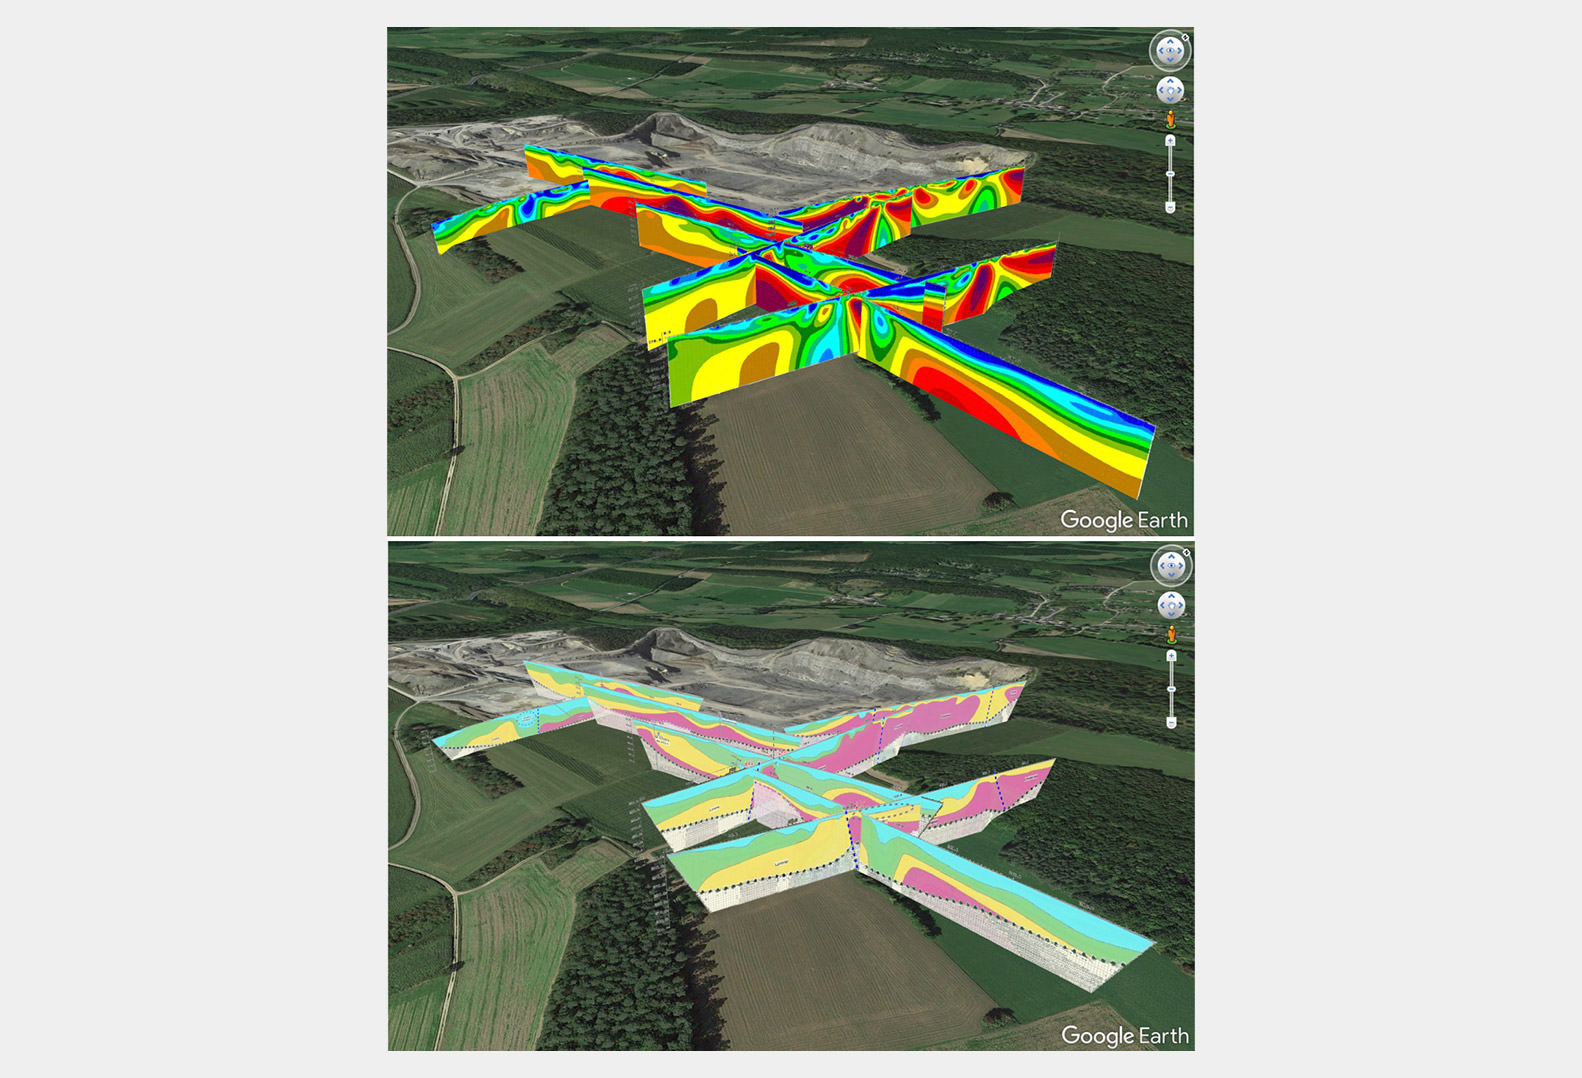 Comparison images of the geophysical model and the interpretative geological model